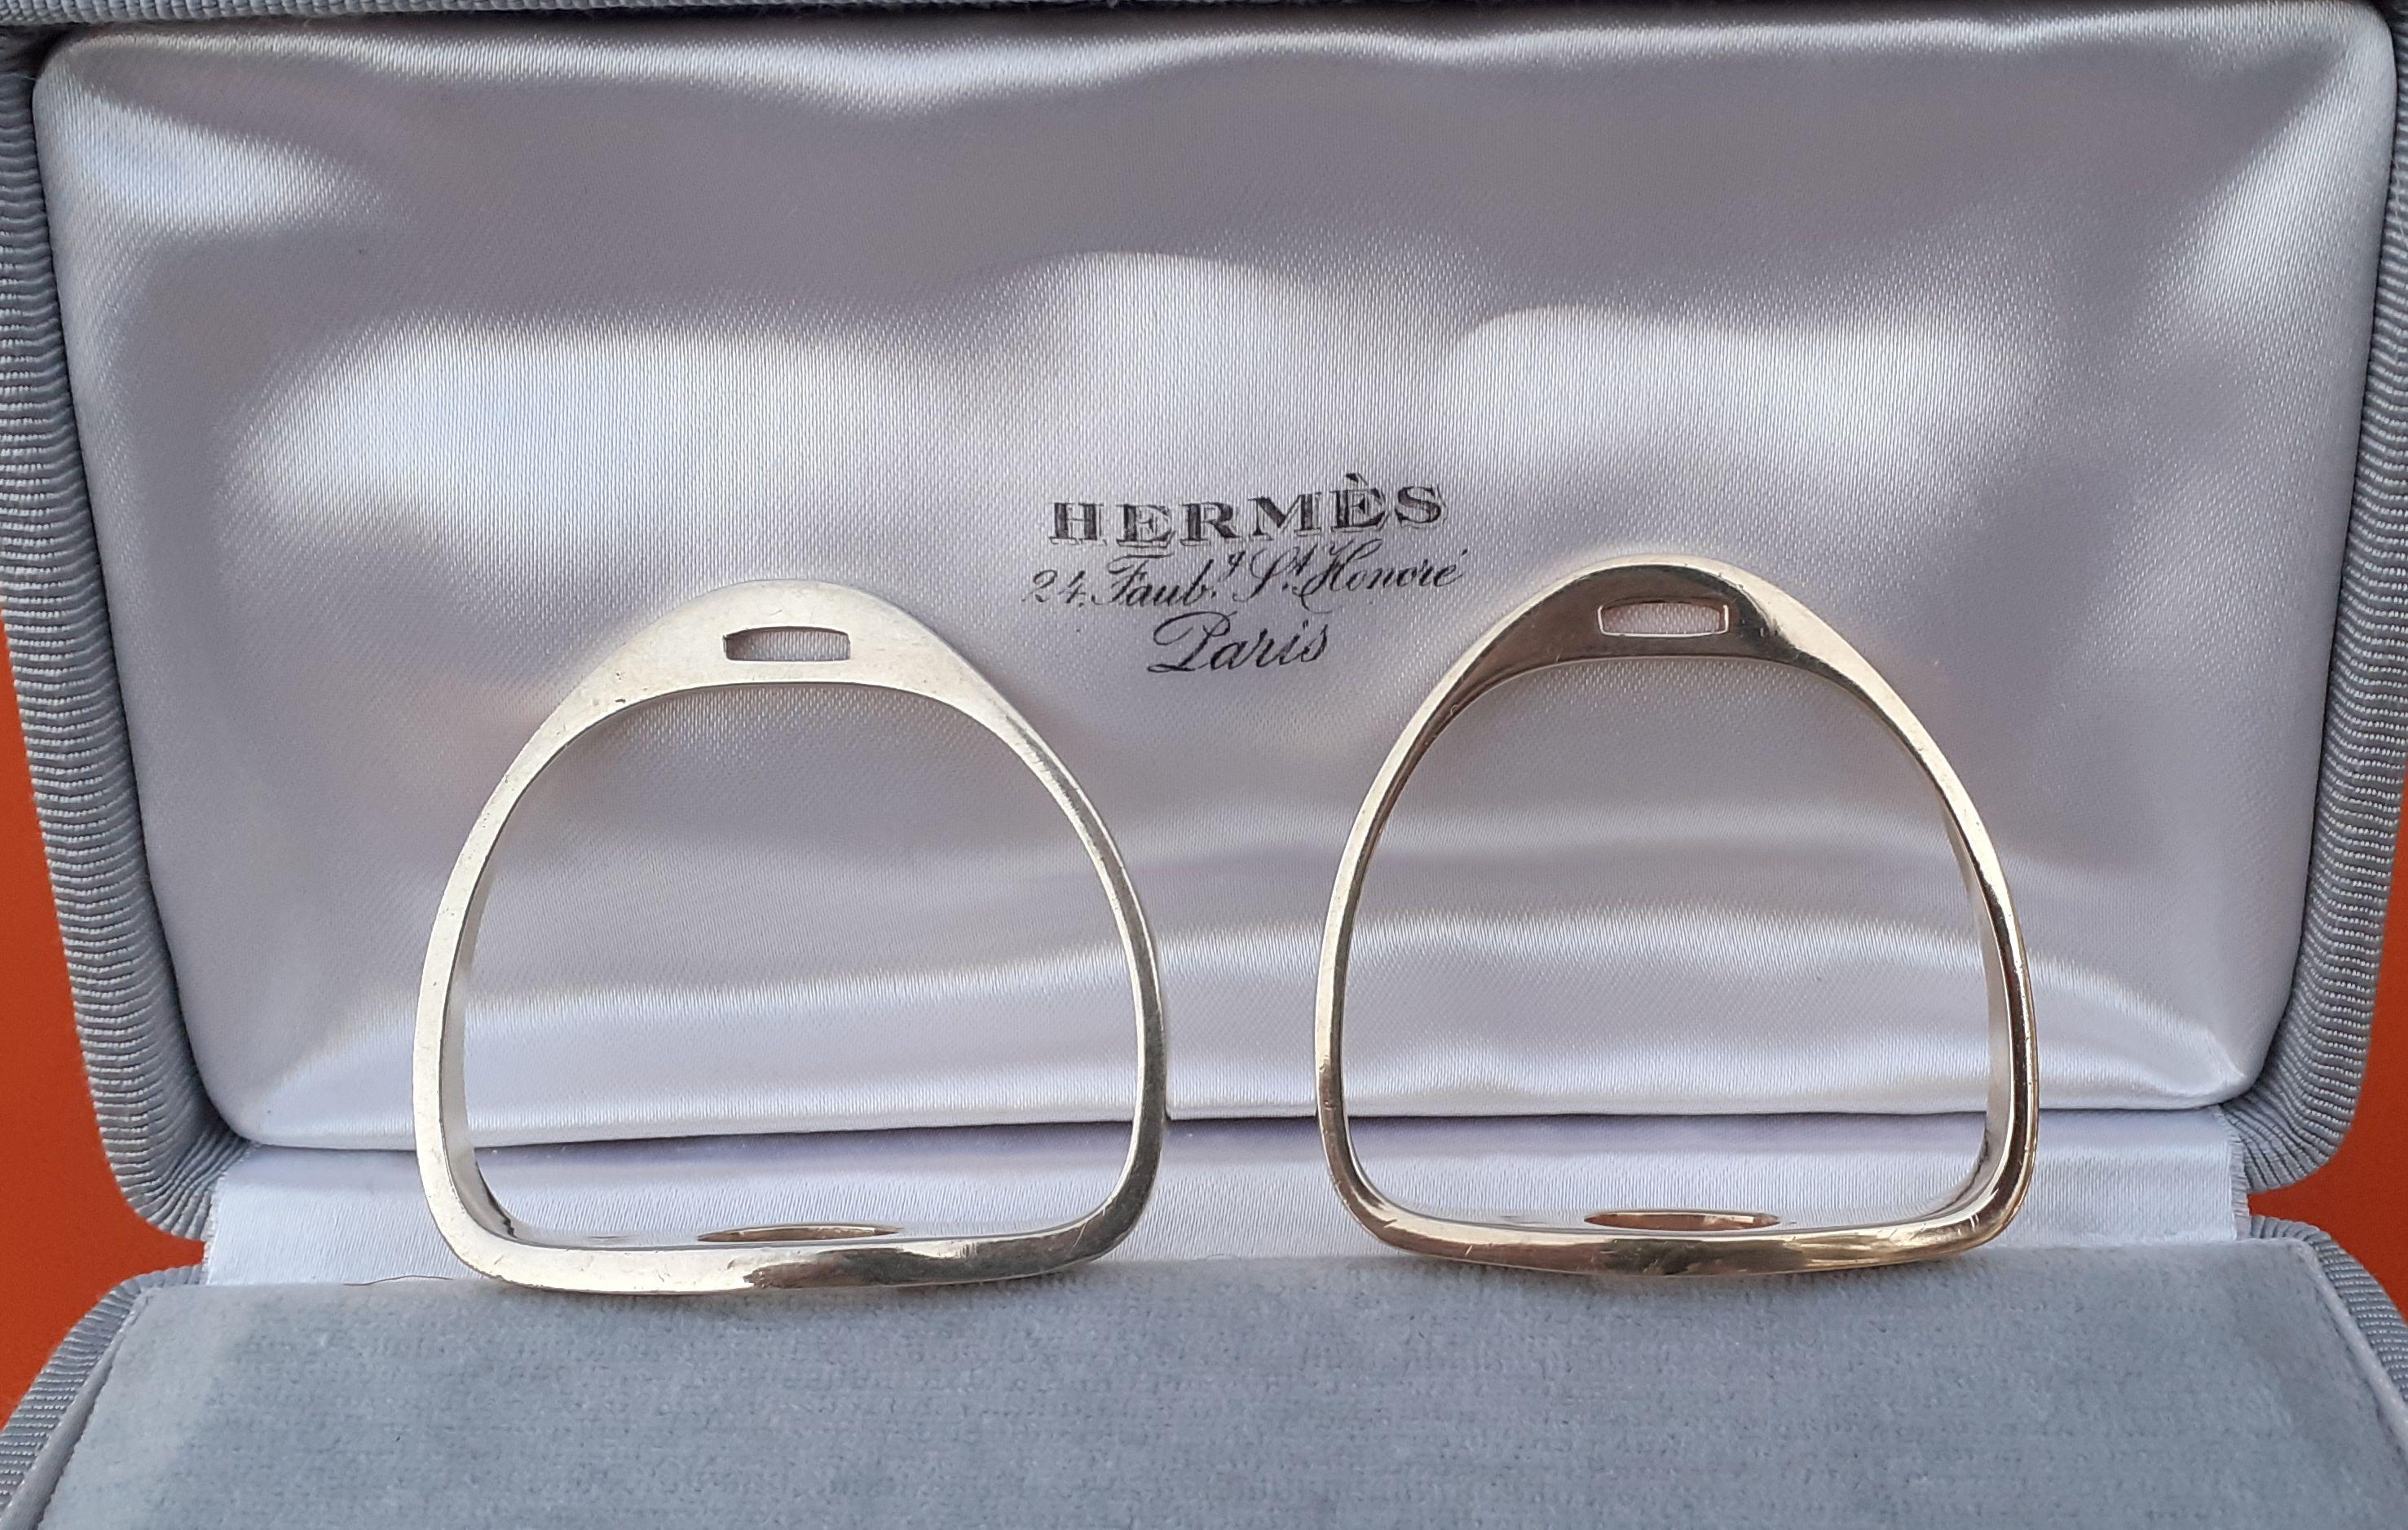 Exceptional Hermès Set of 2 Napkin Rings Stirrups Shaped in Silver-Gilt Texas For Sale 2